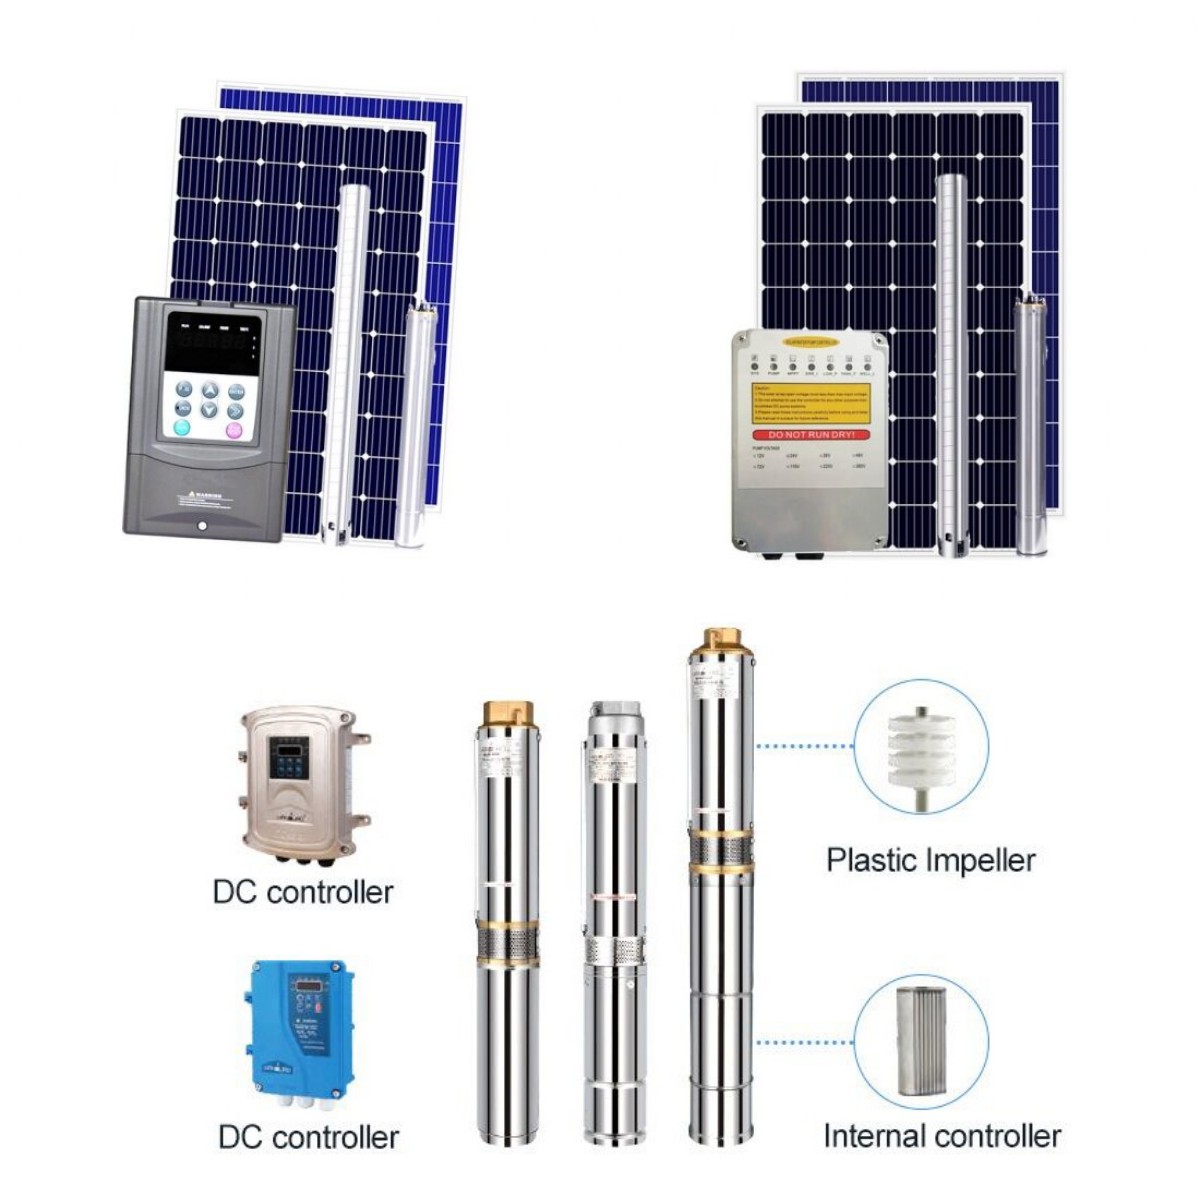 Does a solar water pump need a battery?